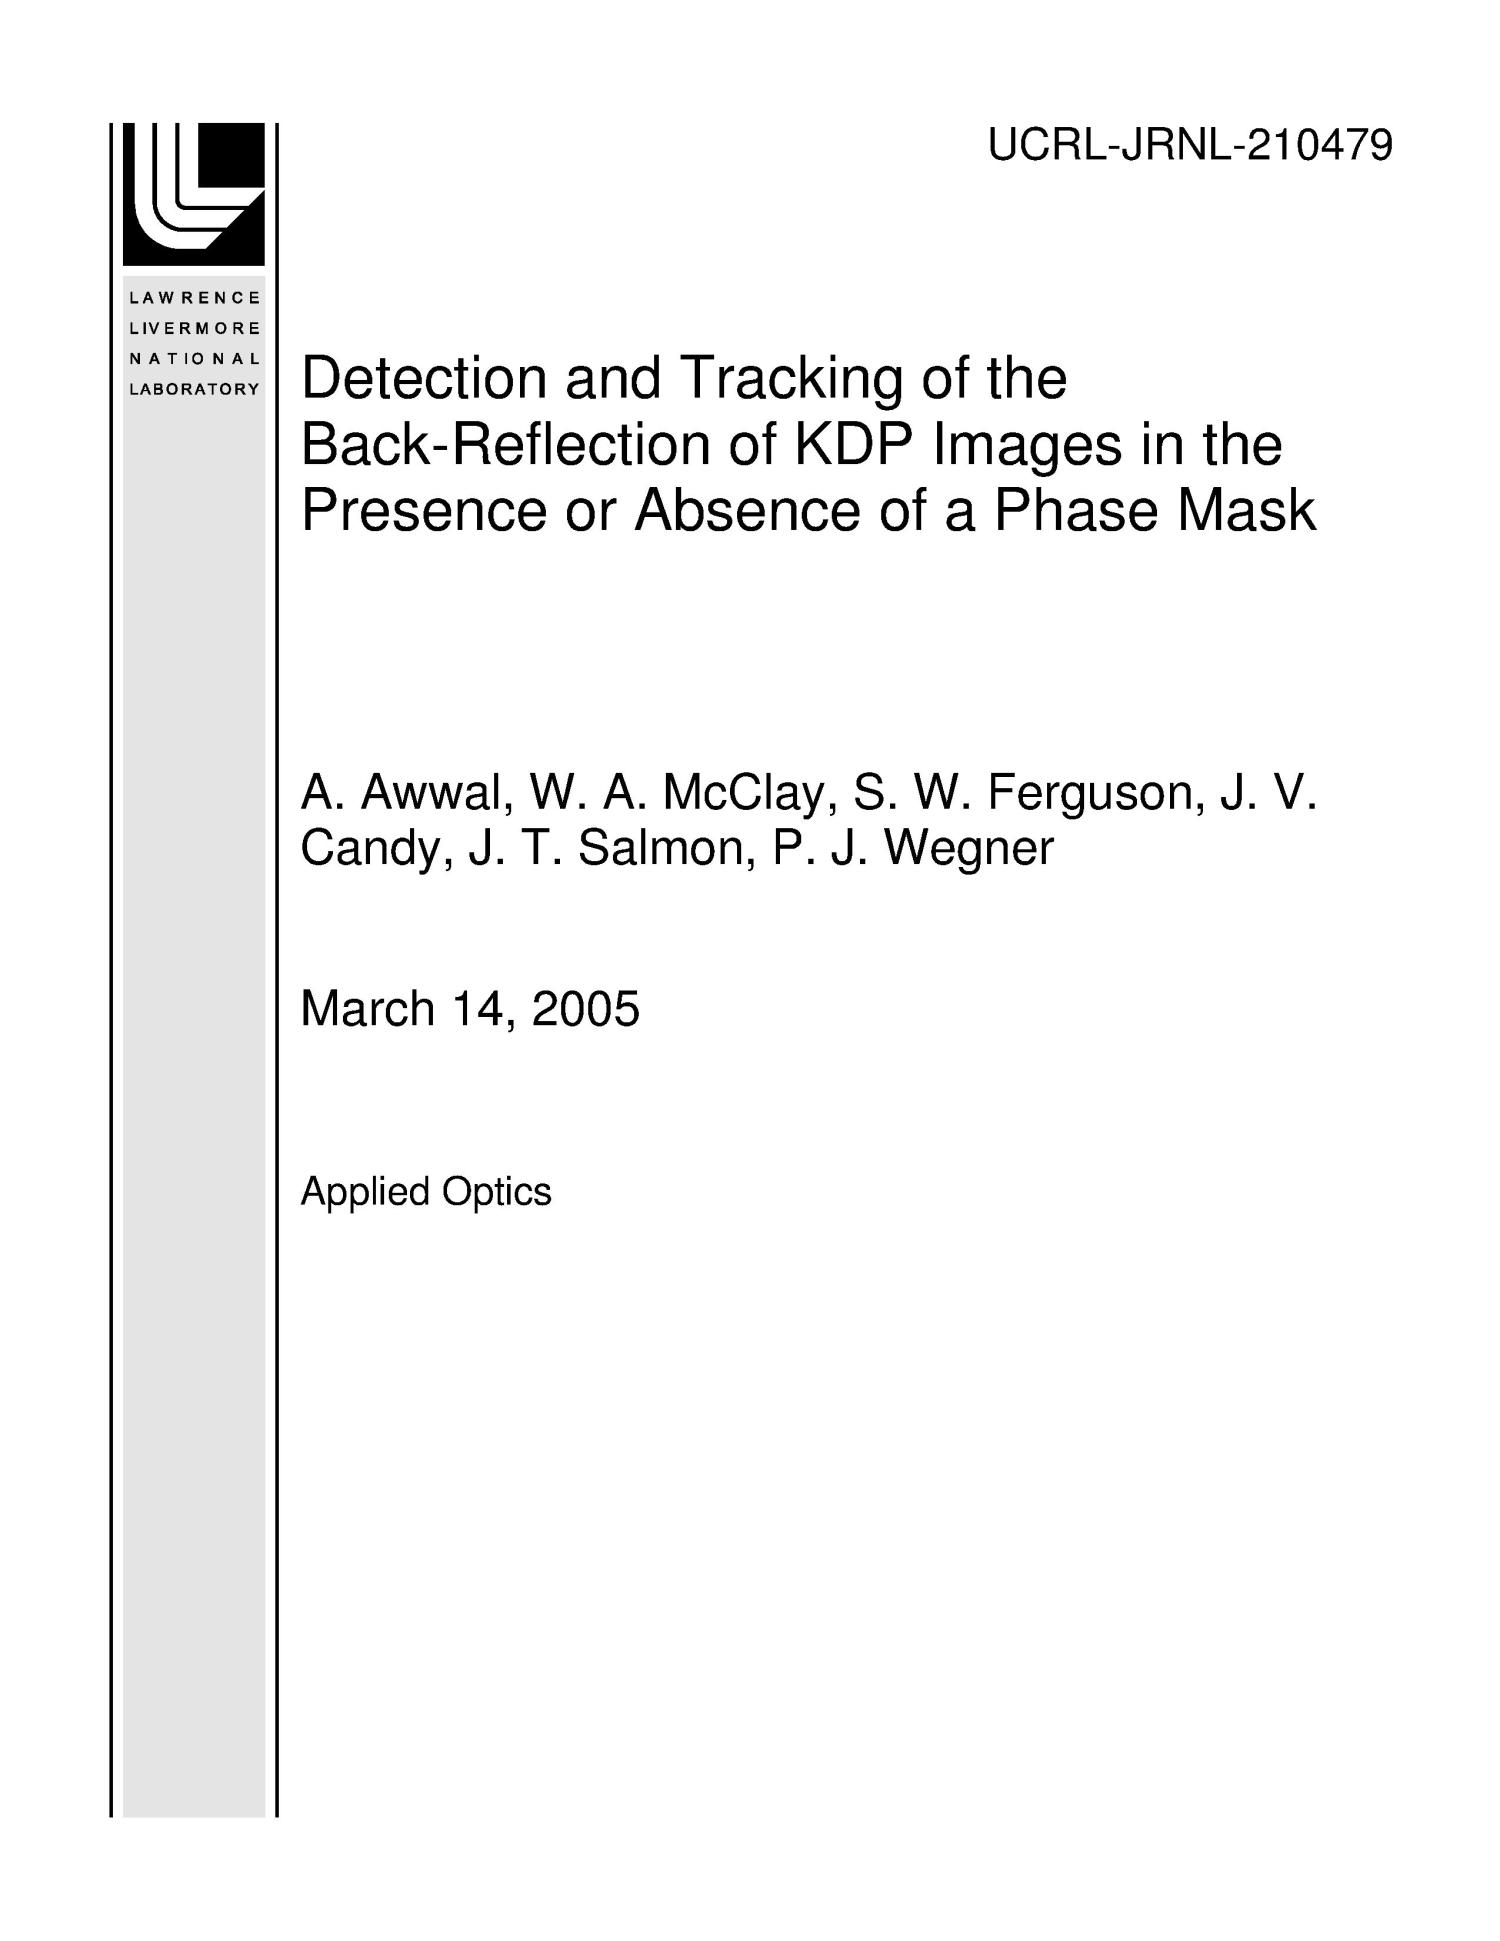 Detection and Tracking of the Back-Reflection of KDP Images in the Presence or Absence of a Phase Mask
                                                
                                                    [Sequence #]: 1 of 16
                                                